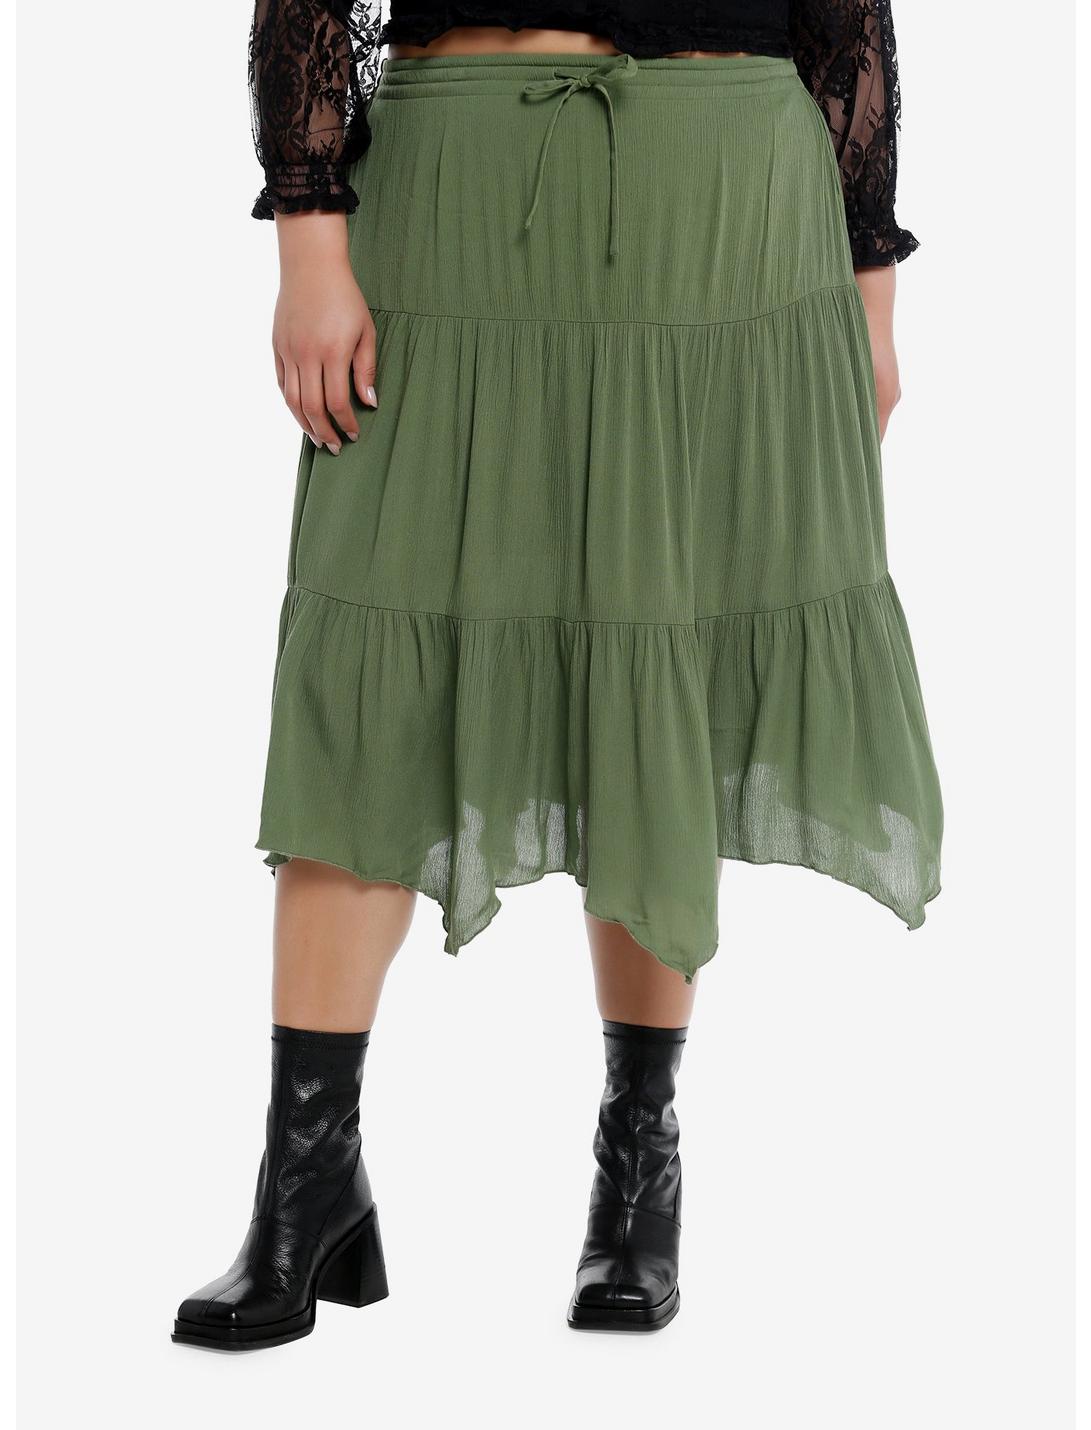 Thorn & Fable® Green Tiered Hanky Hem Midi Skirt Plus Size, OLIVE, hi-res